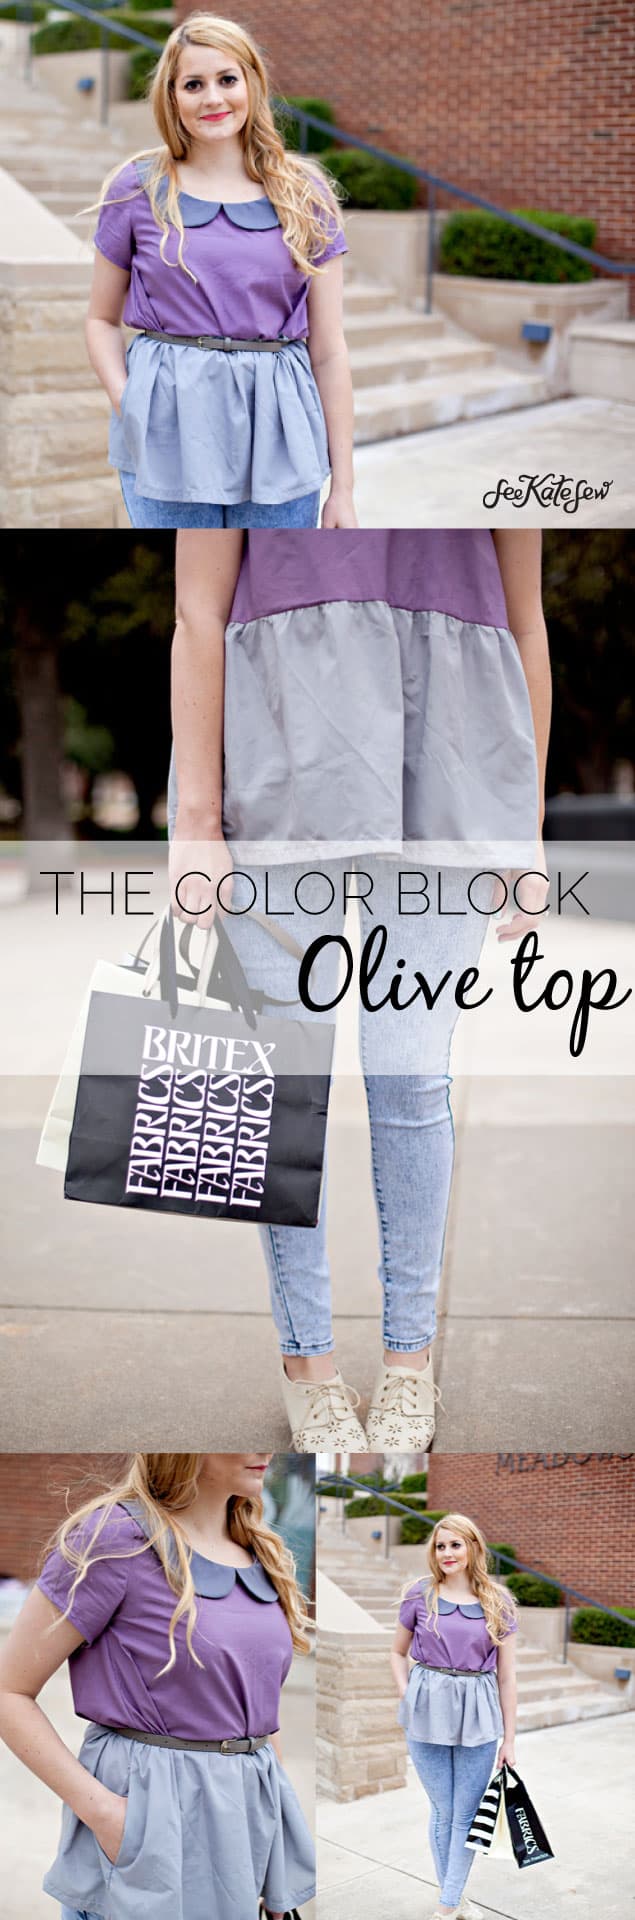 colorblock OLIVE top | See Kate Sew